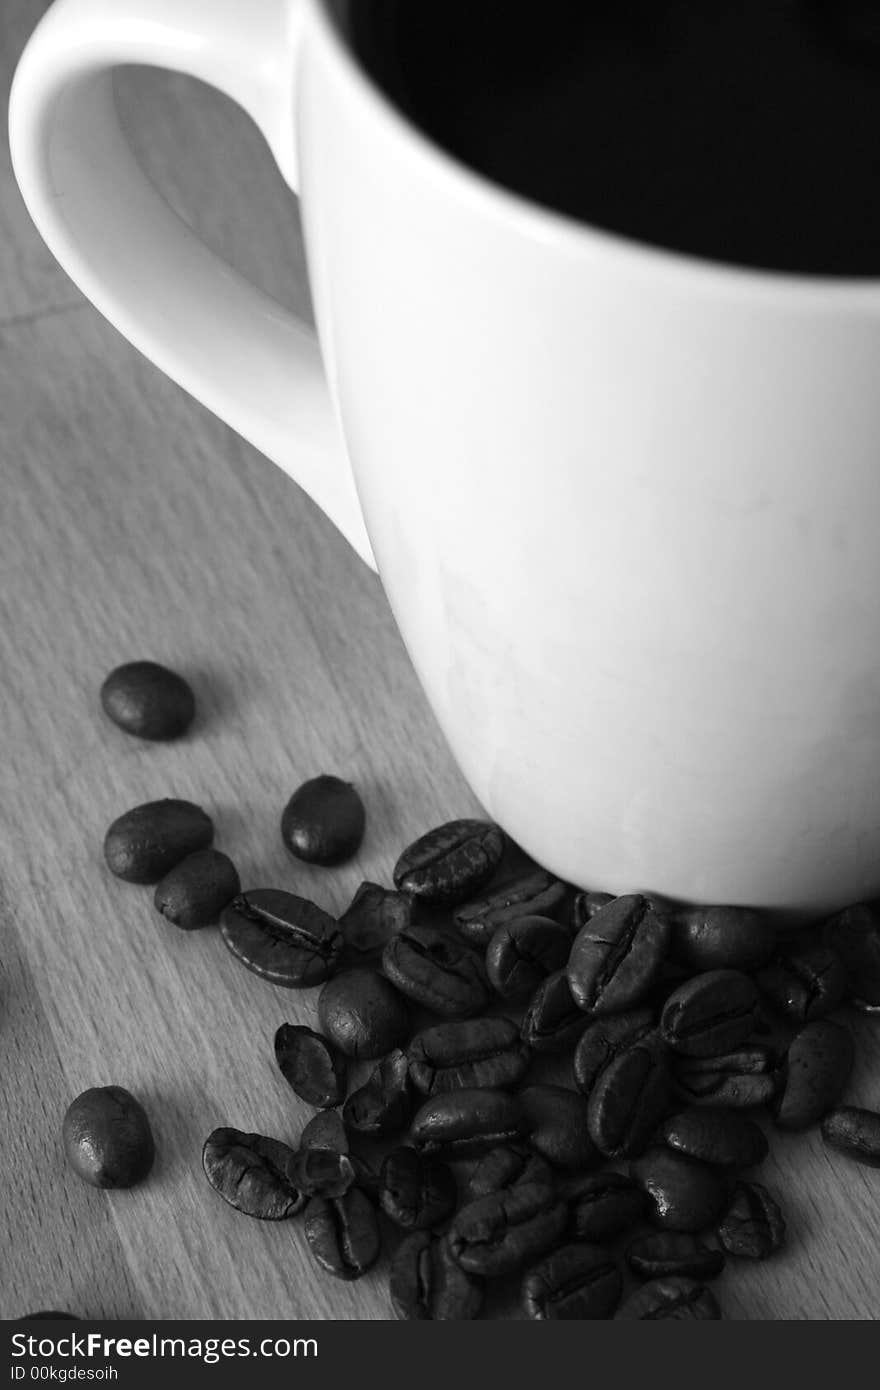 Black coffee in a white mug with roasted coffee beans spread around,black and white image